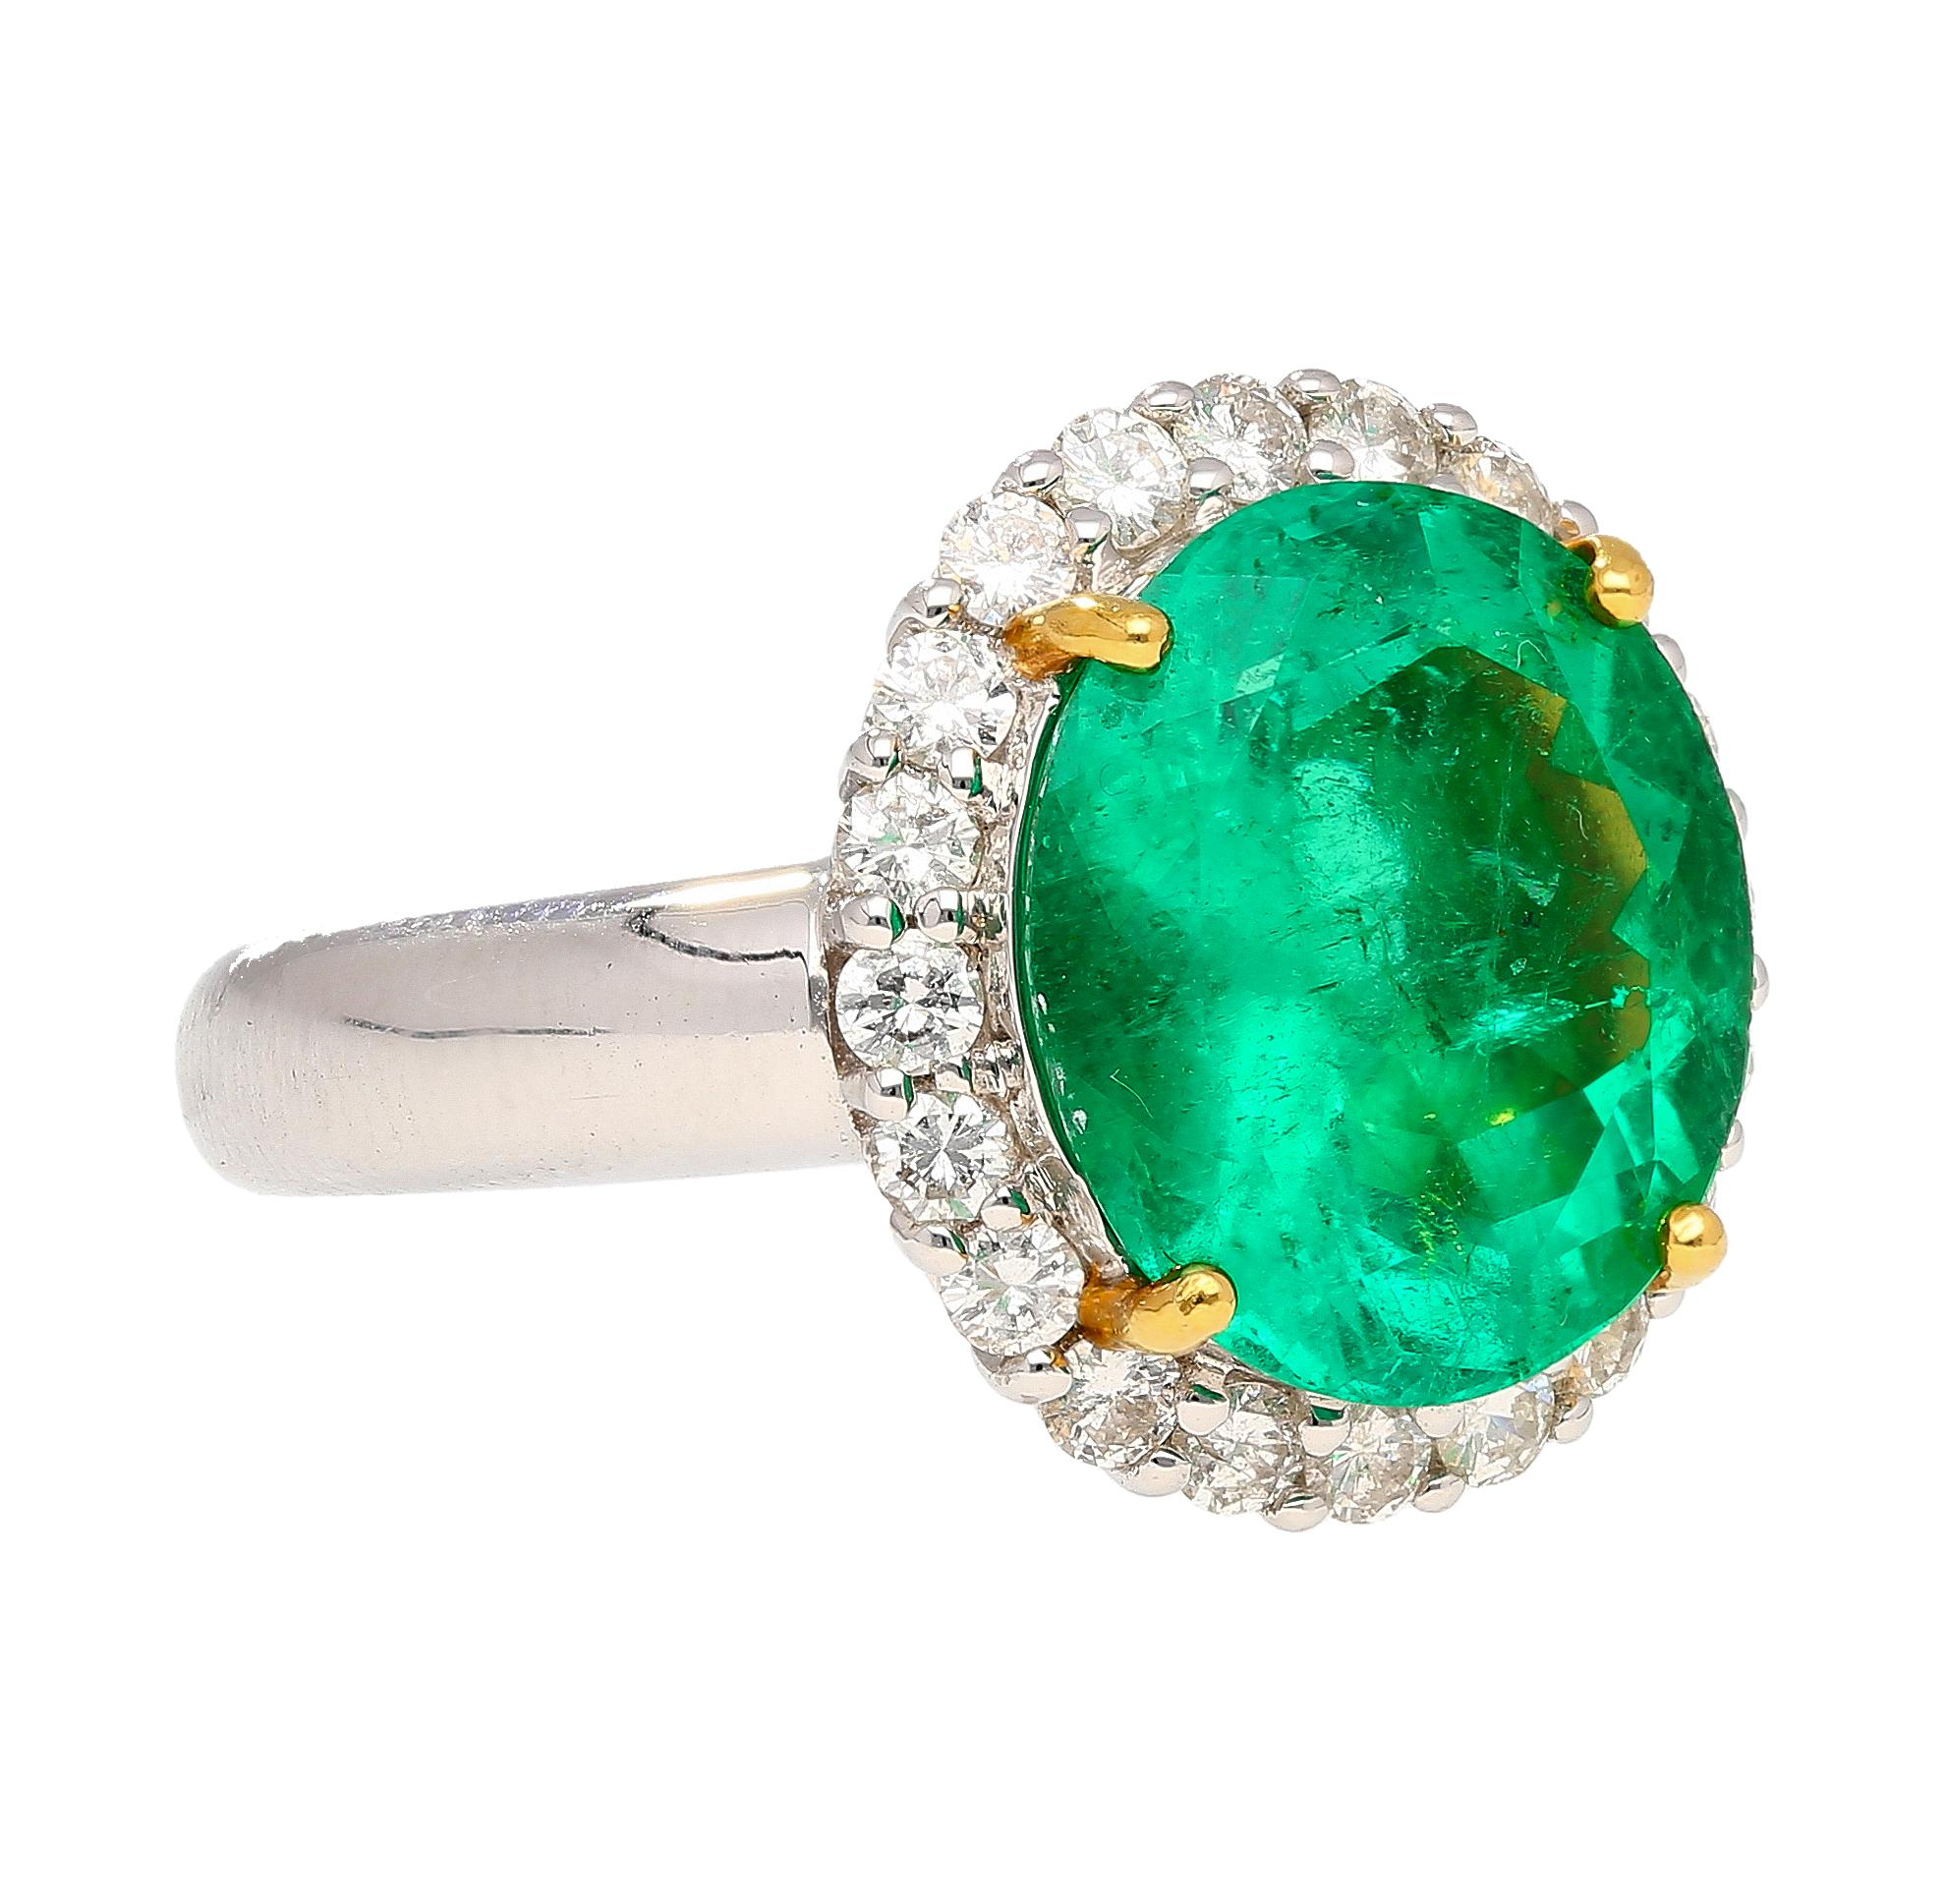 GRS certified 5.03-carat oval cut Colombian Emerald and round cut white diamond halo ring in 18k white gold. The center stone Emerald bears minor oil treatment and a faceted oval cut shape. The stone is eye-clean and full of life. Complemented with